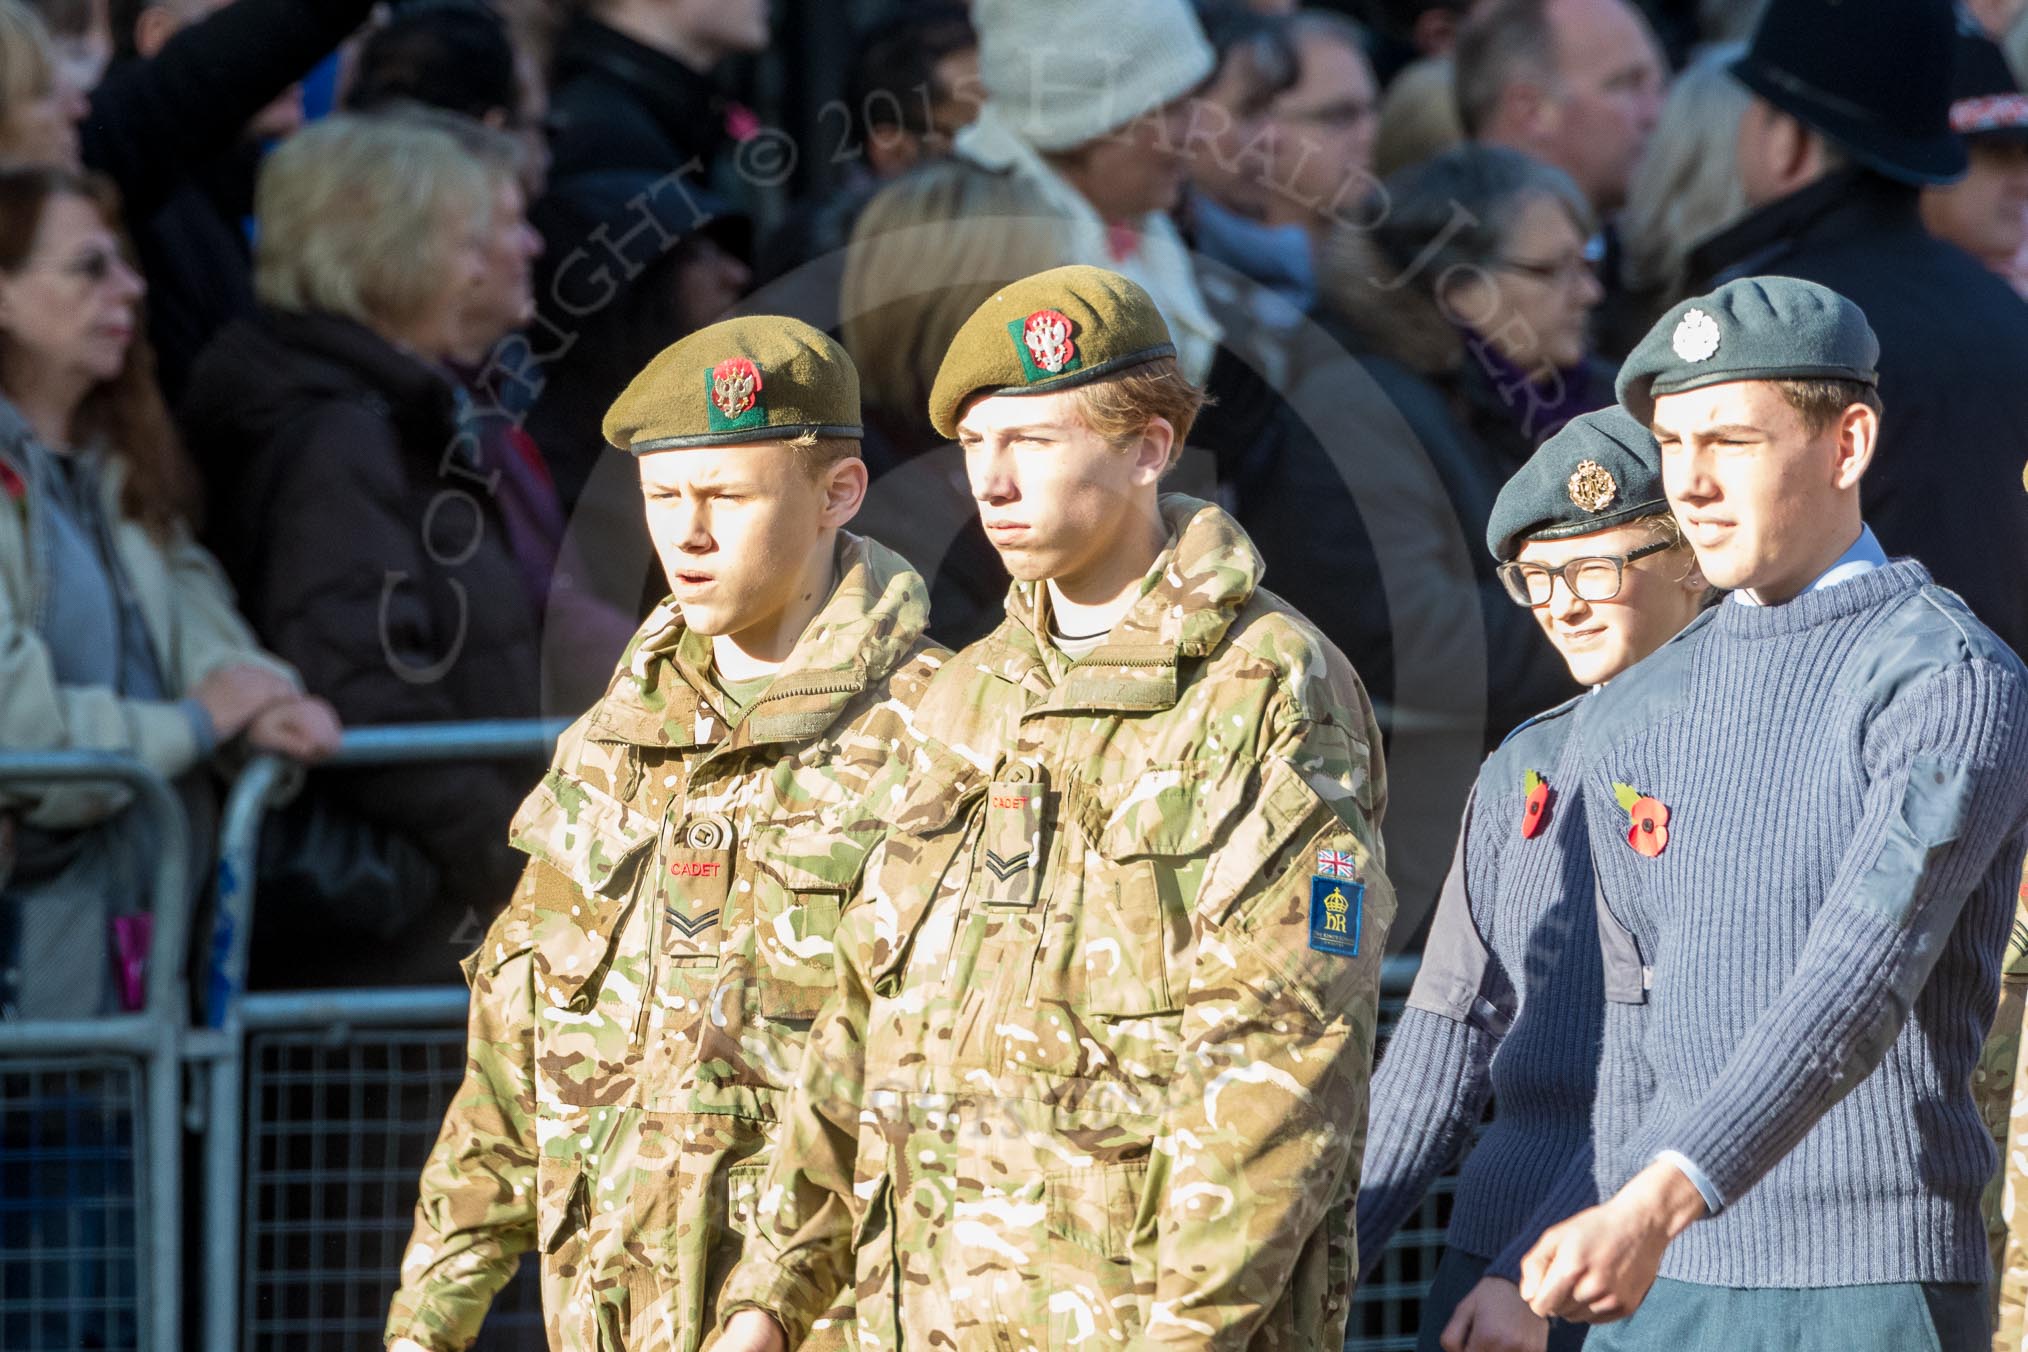 March Past, Remembrance Sunday at the Cenotaph 2016: M32 Army and combined Cadet Force.
Cenotaph, Whitehall, London SW1,
London,
Greater London,
United Kingdom,
on 13 November 2016 at 13:18, image #2799